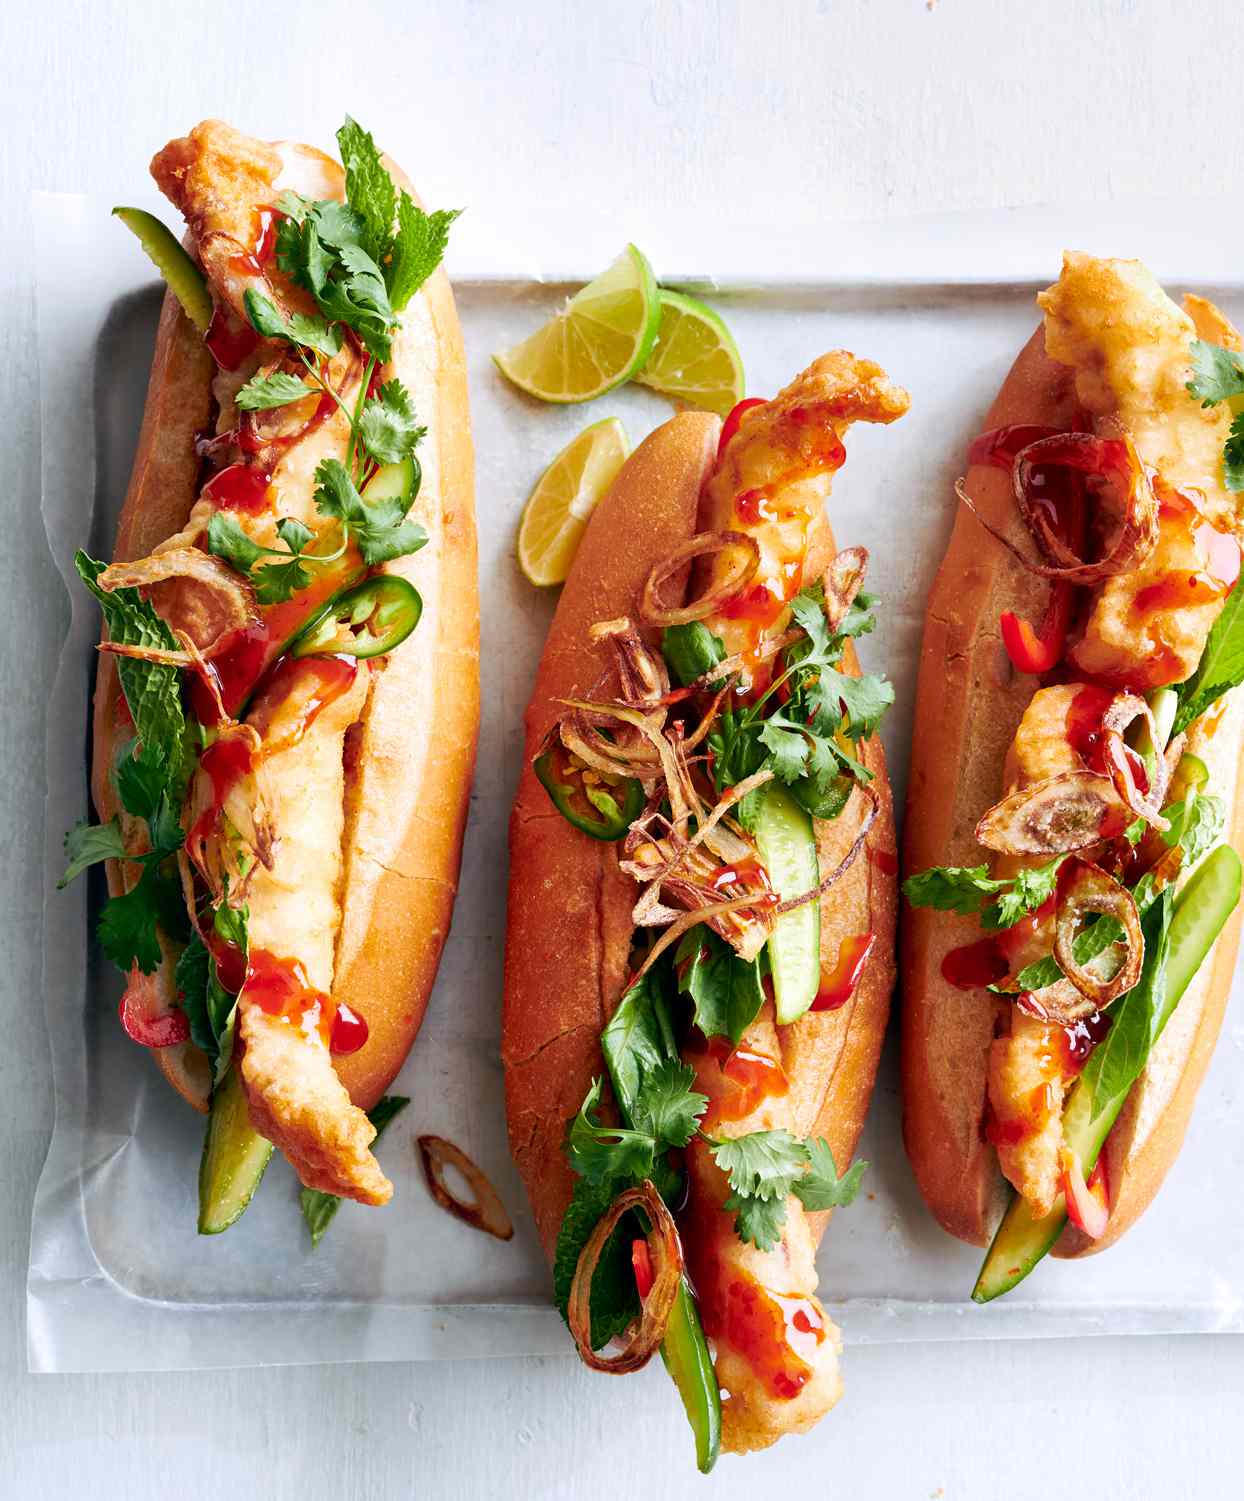 Fried-Fish Subs with Chili Sauce and Herbs